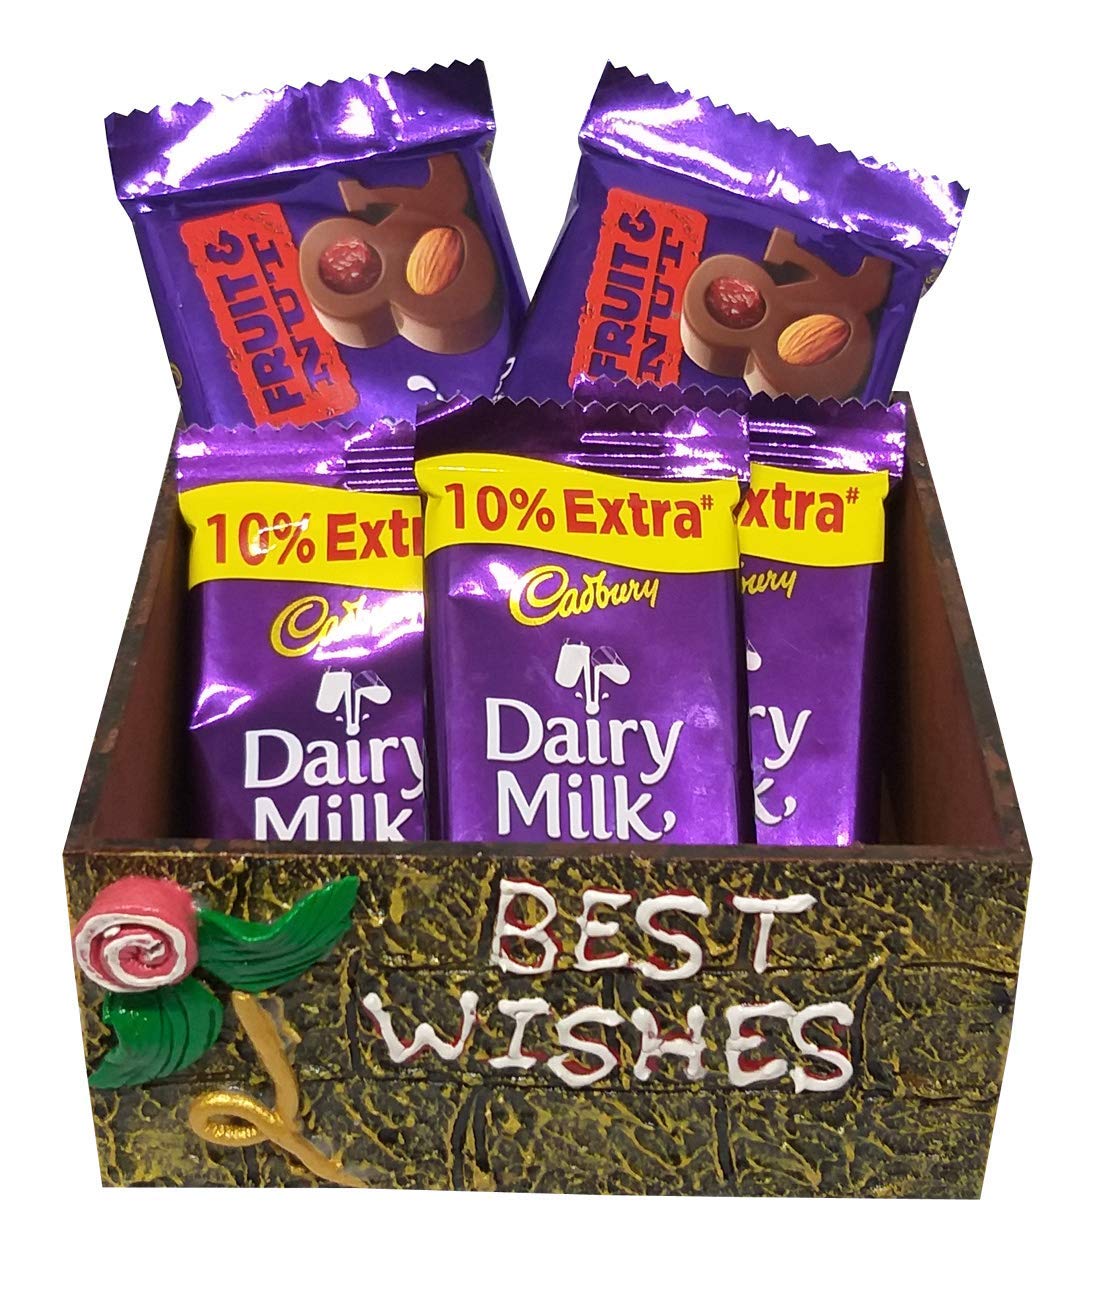 Best of Luck Gifts | Exam Gifts for Students - Gujarat Gifts